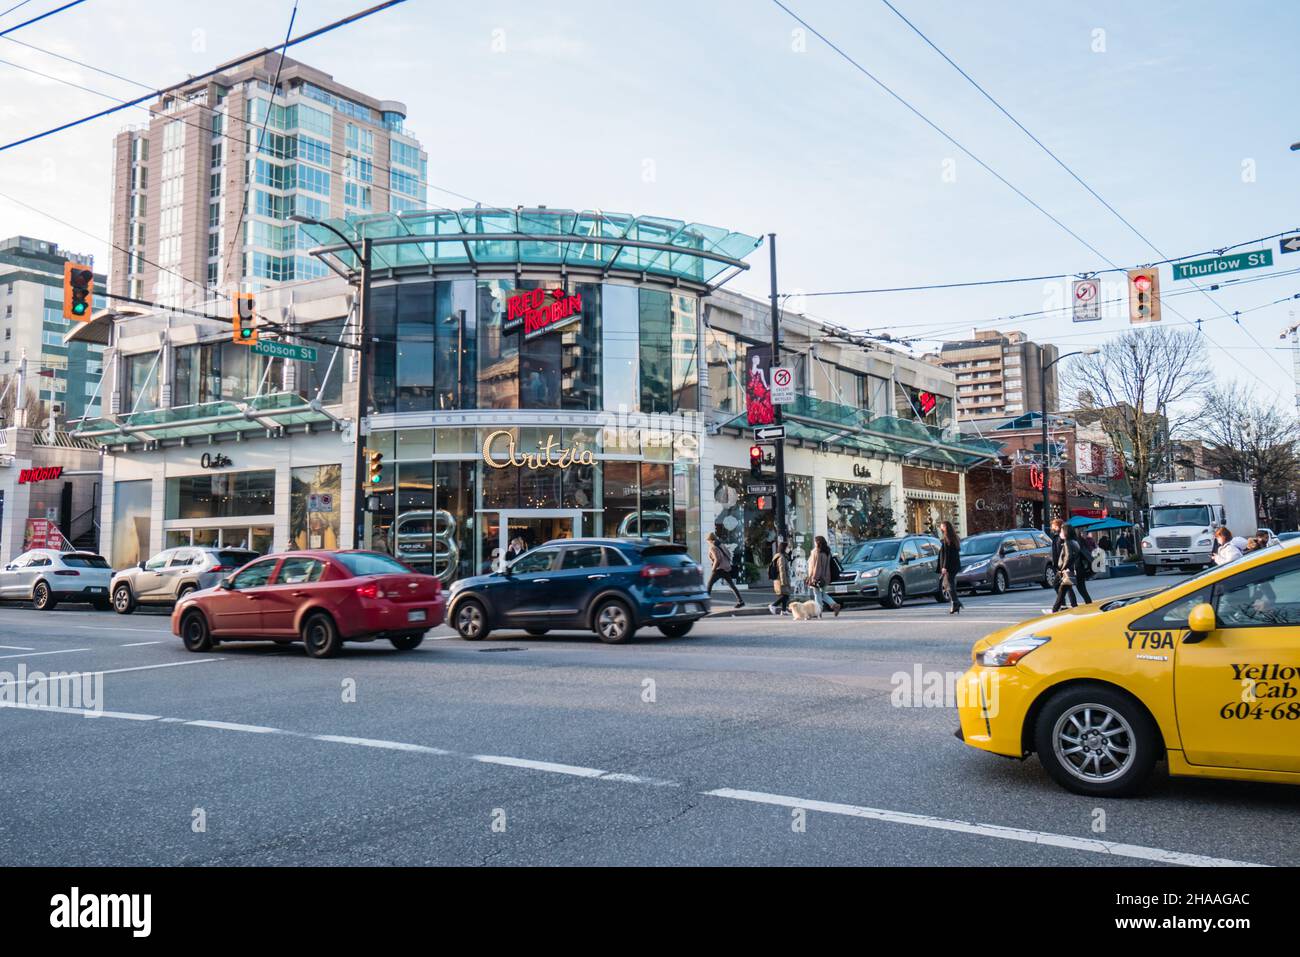 Vancouver robson street shopping district Stock Photo - Alamy